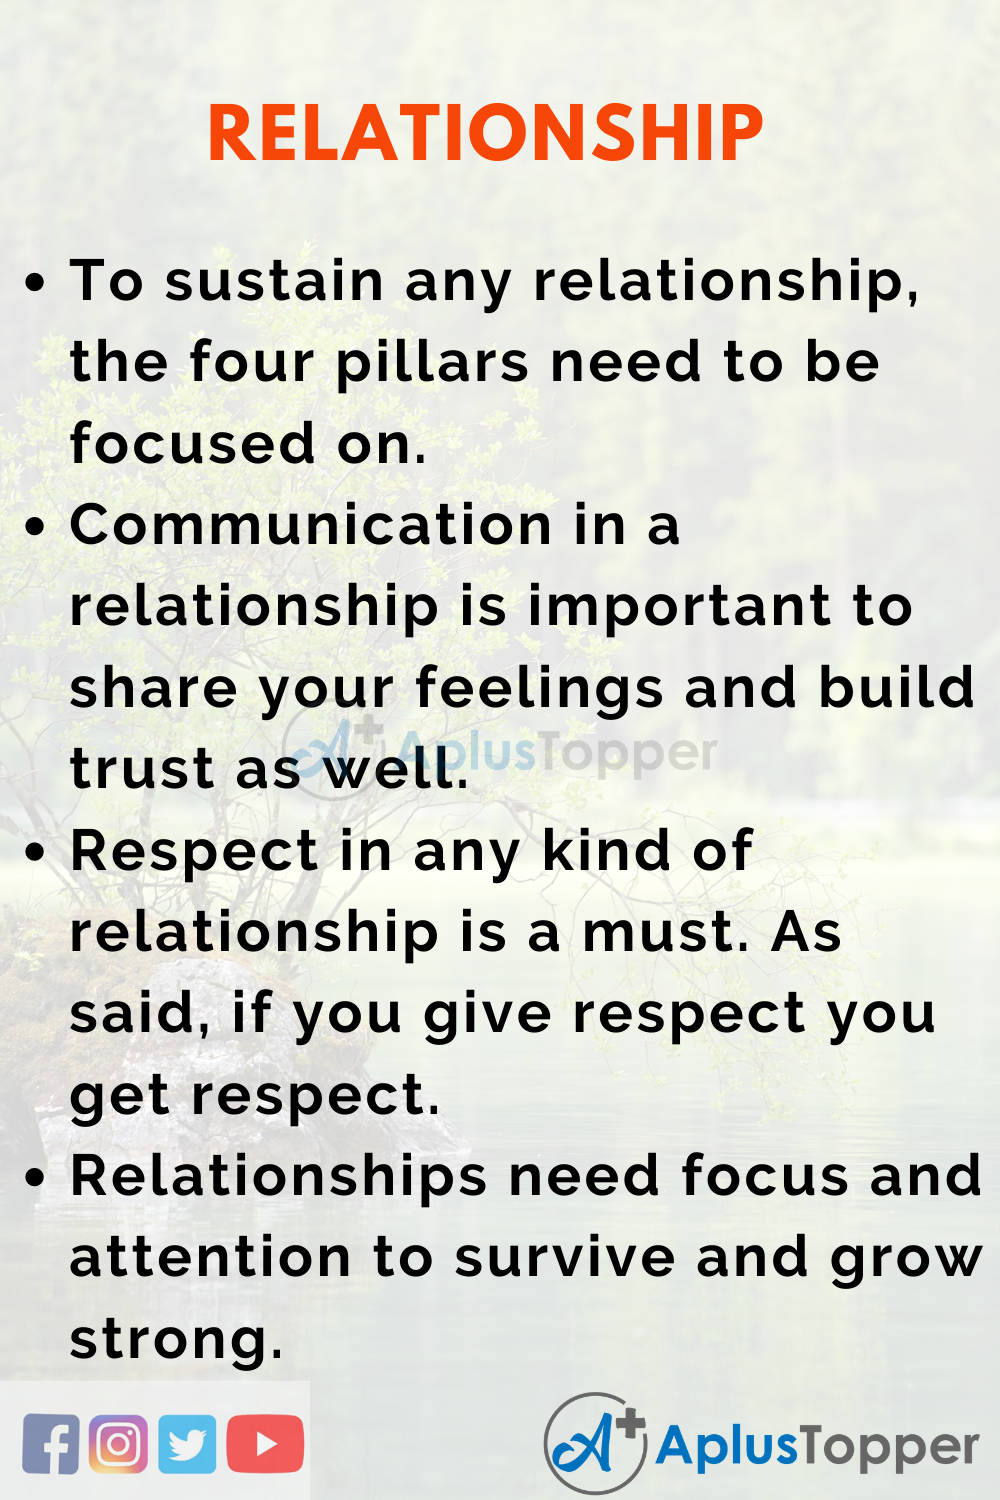 essay about promoting healthy relationship